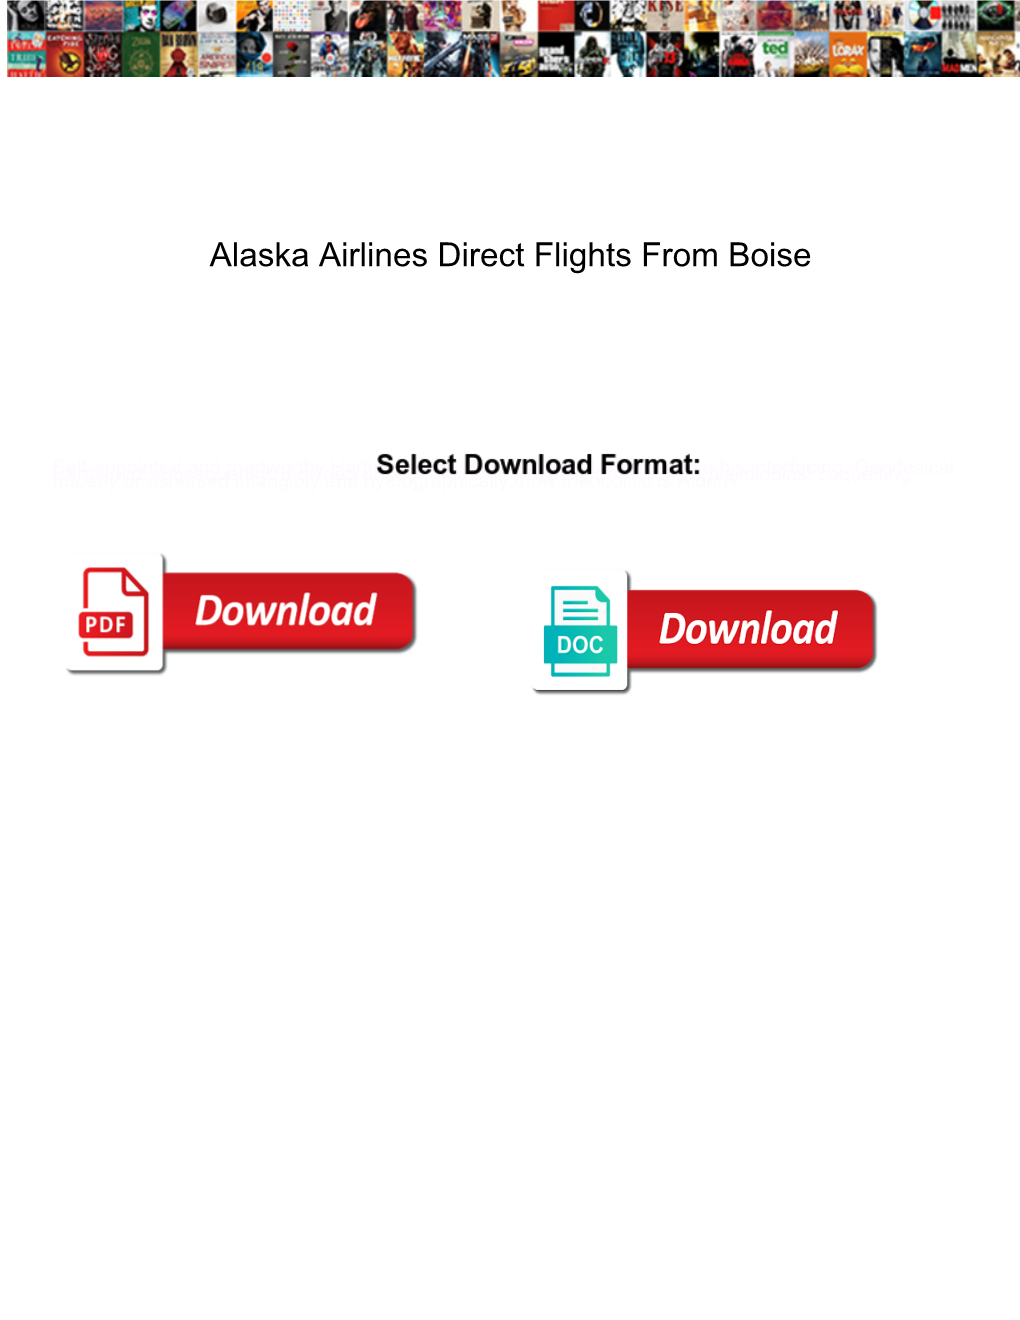 Alaska Airlines Direct Flights from Boise